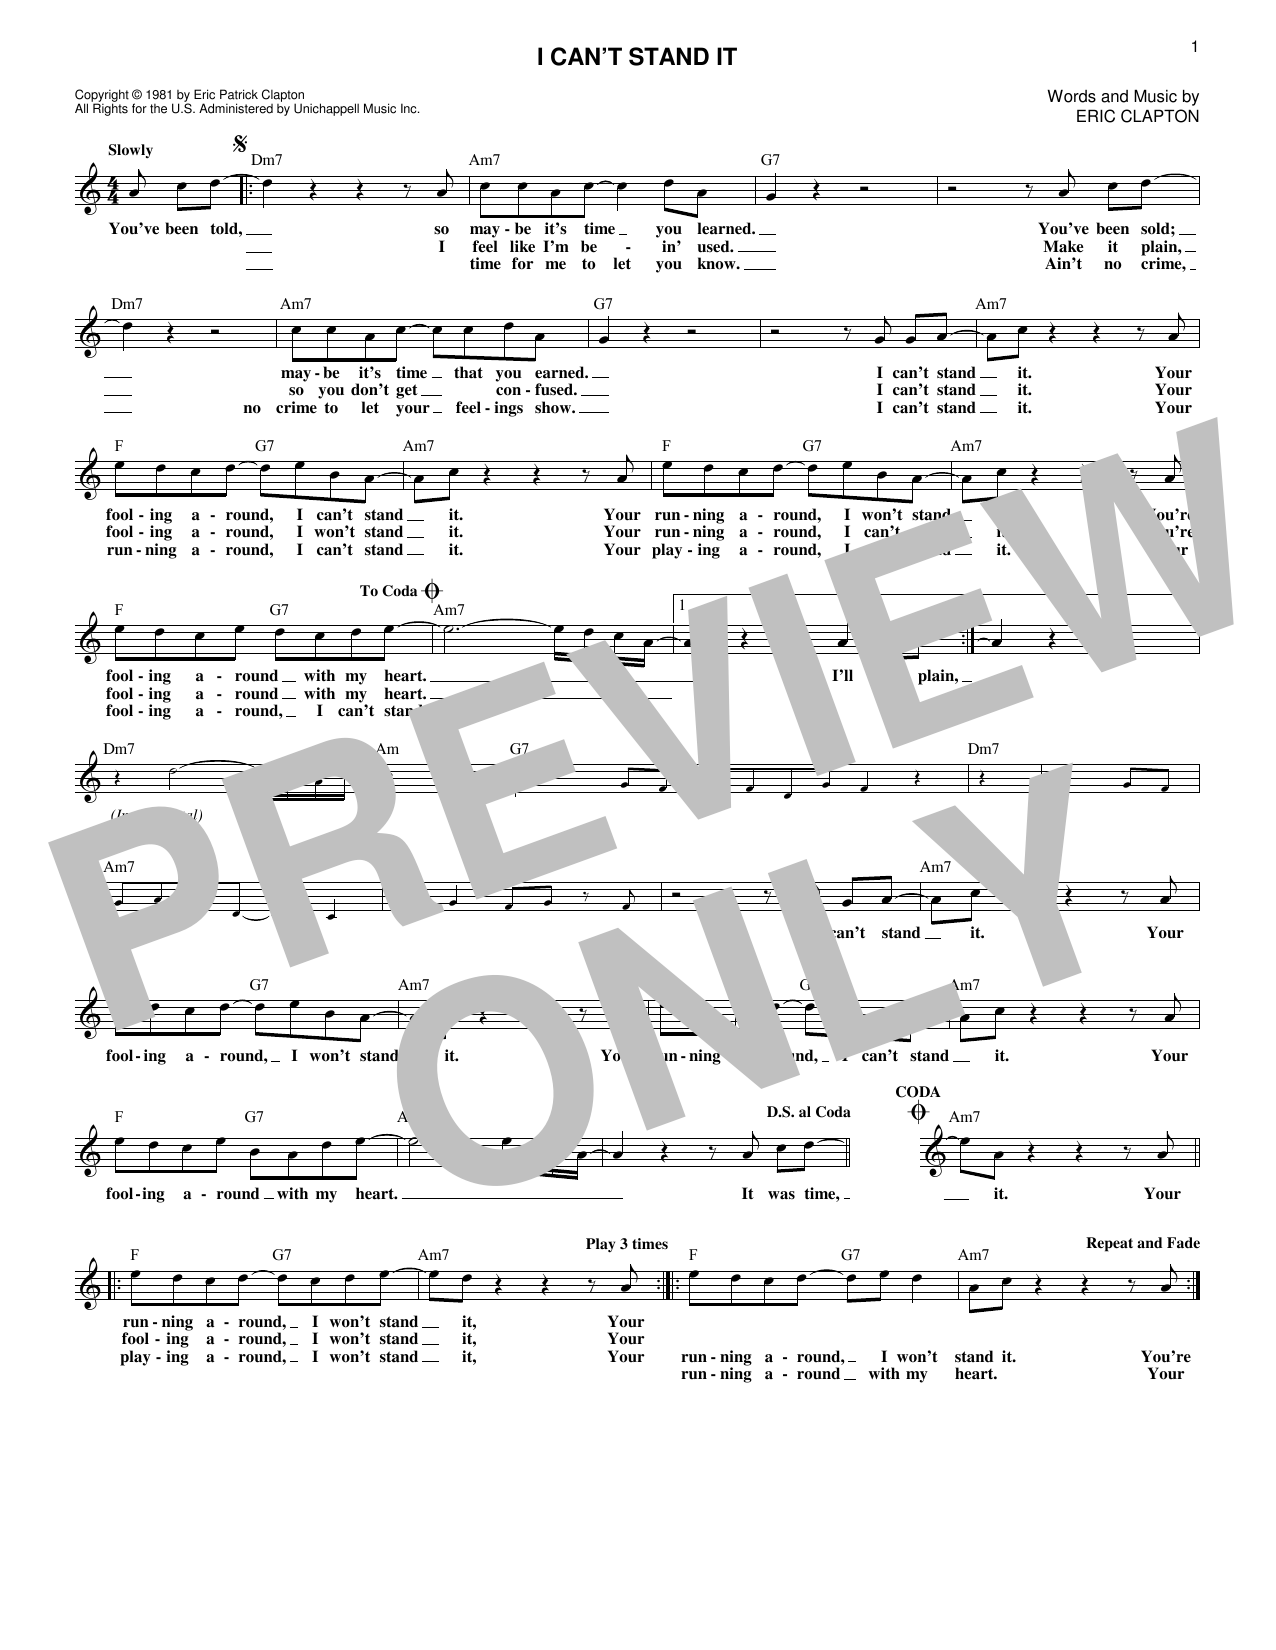 Download Eric Clapton I Can't Stand It Sheet Music